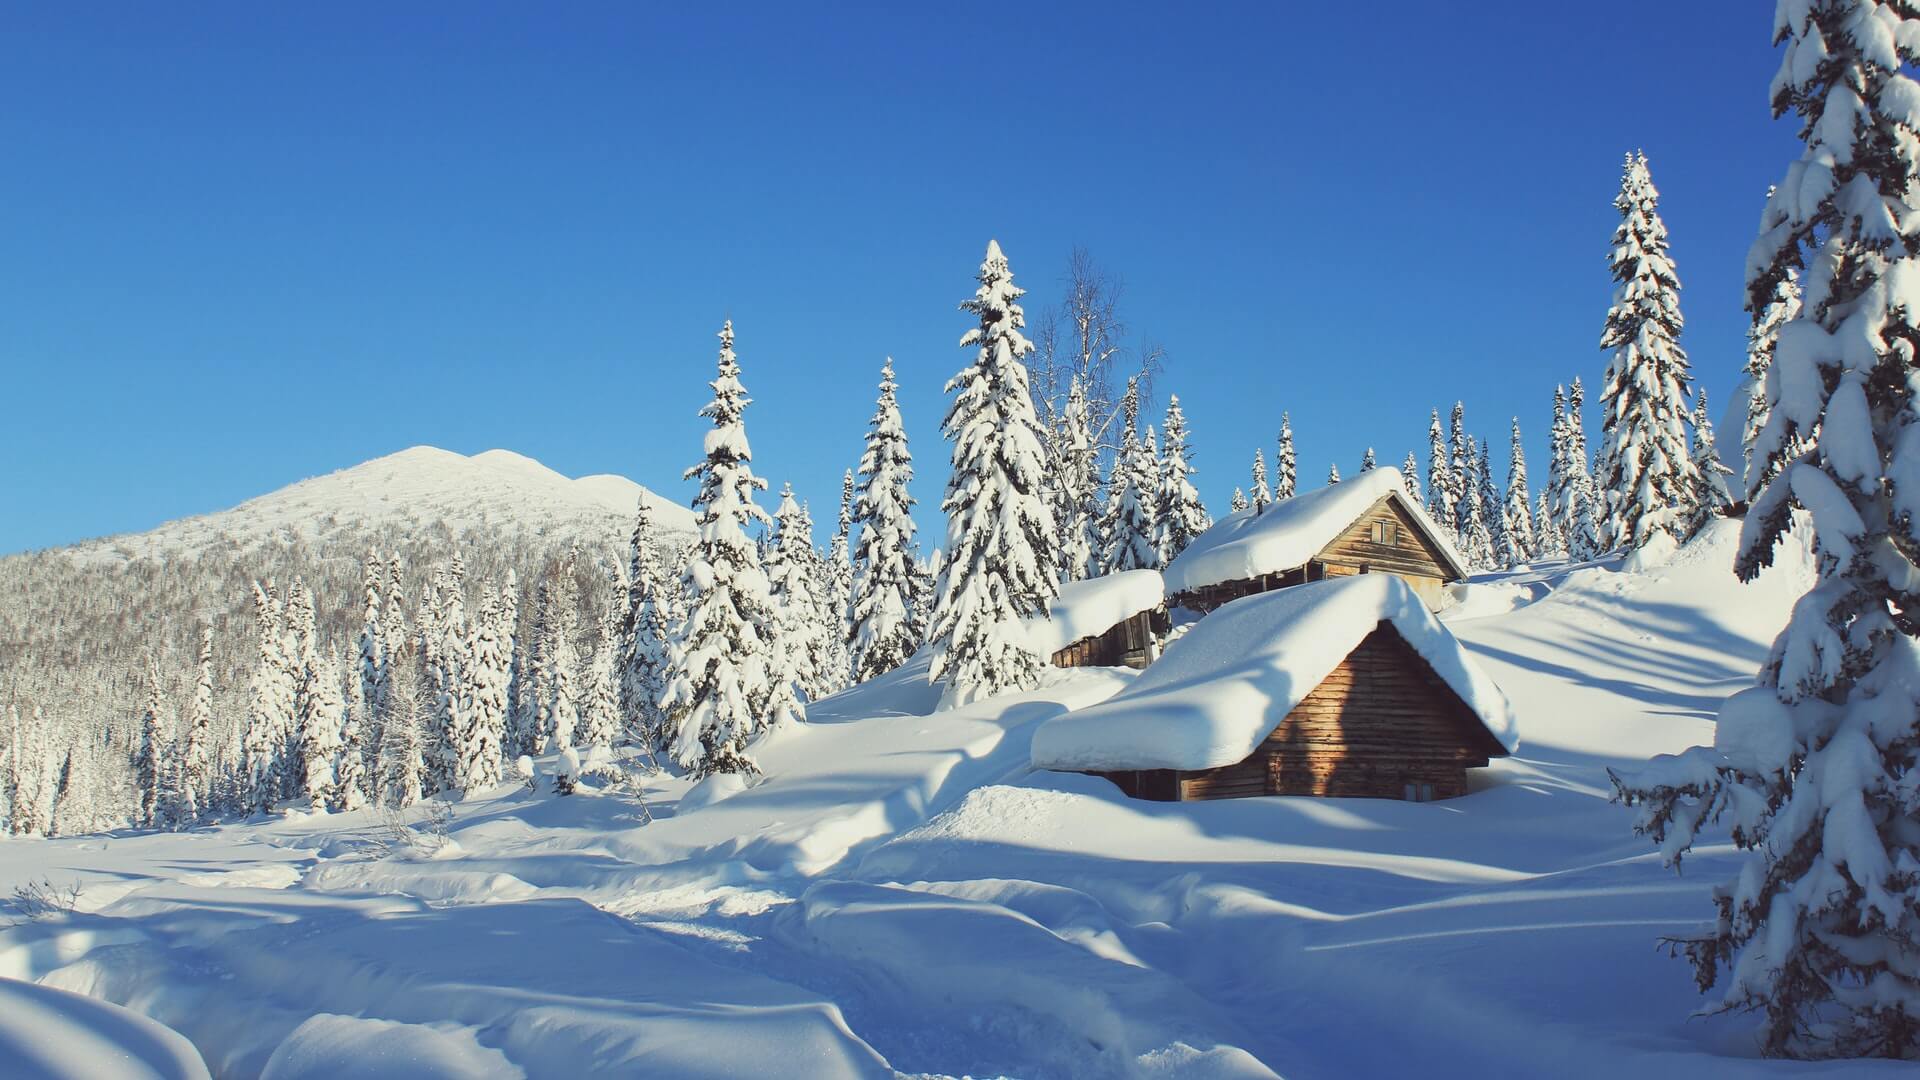 Top 11 Hill stations in India have snowfall